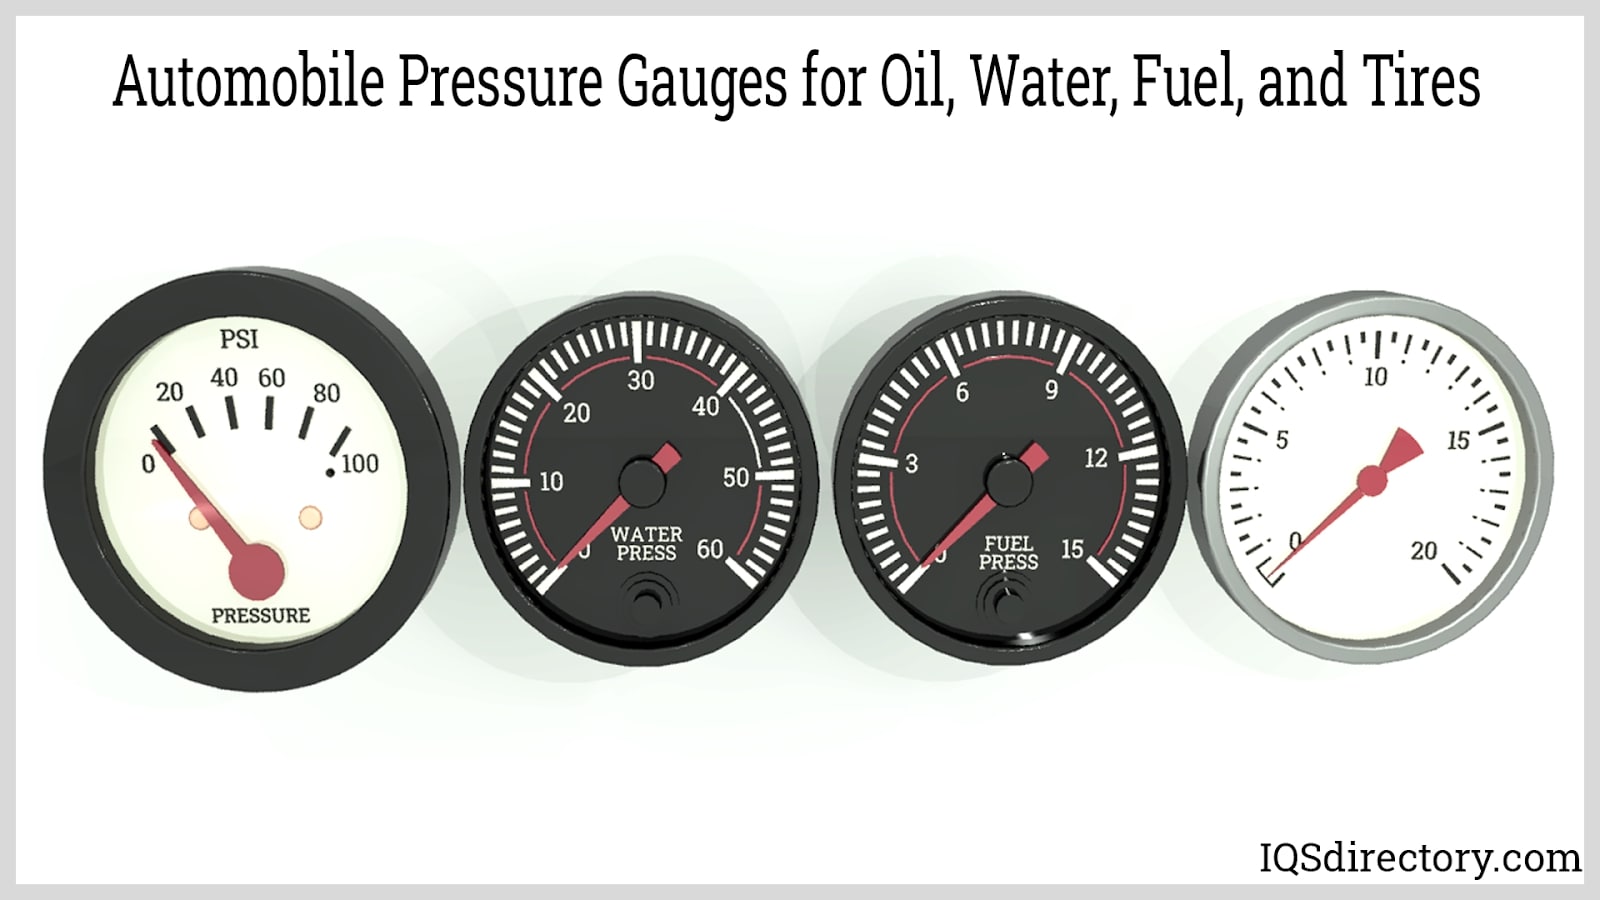 Automobile Pressure Gauges for Oil, Water, Fuel, and Tires